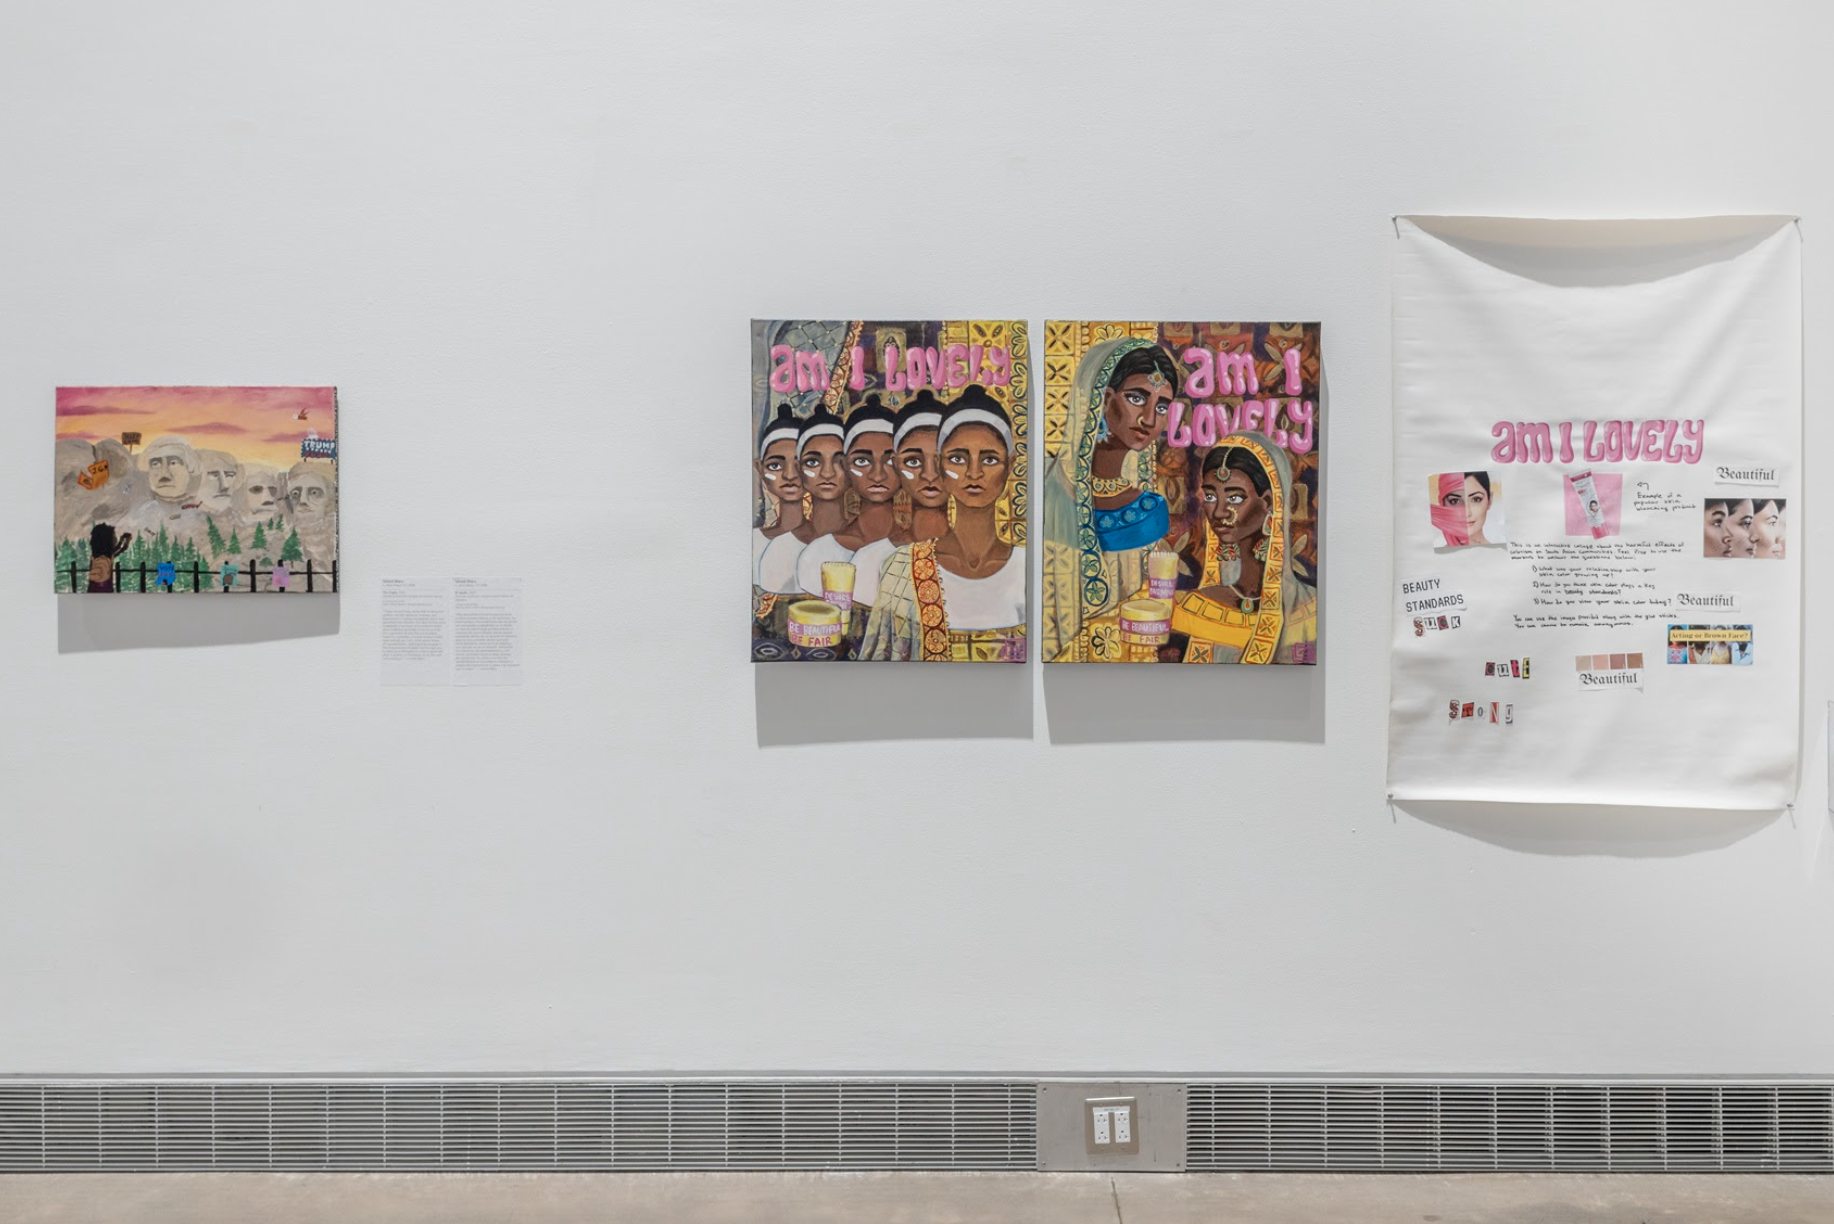 Paintings and a collaborative scrapbook hang on a white gallery wall. On the left, a small painting of Mount Rushmore at sunset, decorated with political protest signs, trees, and onlookers. On the left are two paintings with pink text: Am I Lovely? The left painting shows South Asian women of different brown complexions with white t-shirts and a white skincare product on their cheeks. The right painting shows two women in wrapped garments, gold facial jewelry, and head coverings. To the right, an interactive art piece asks the viewer to paste cut-out magazine clippings that explore colorism.